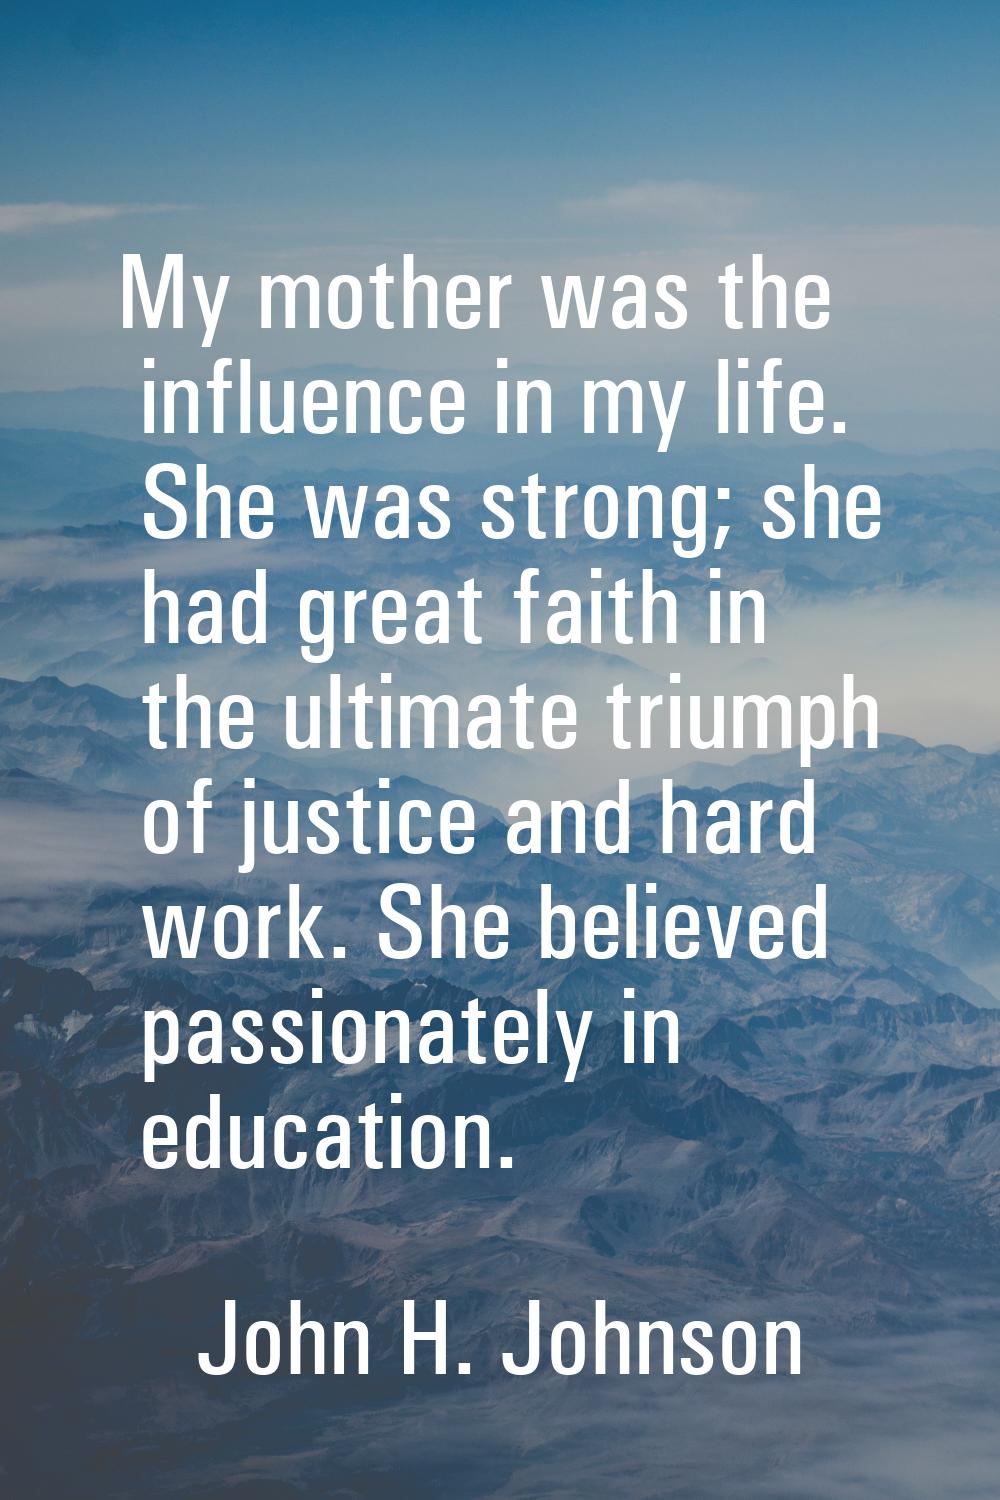 My mother was the influence in my life. She was strong; she had great faith in the ultimate triumph